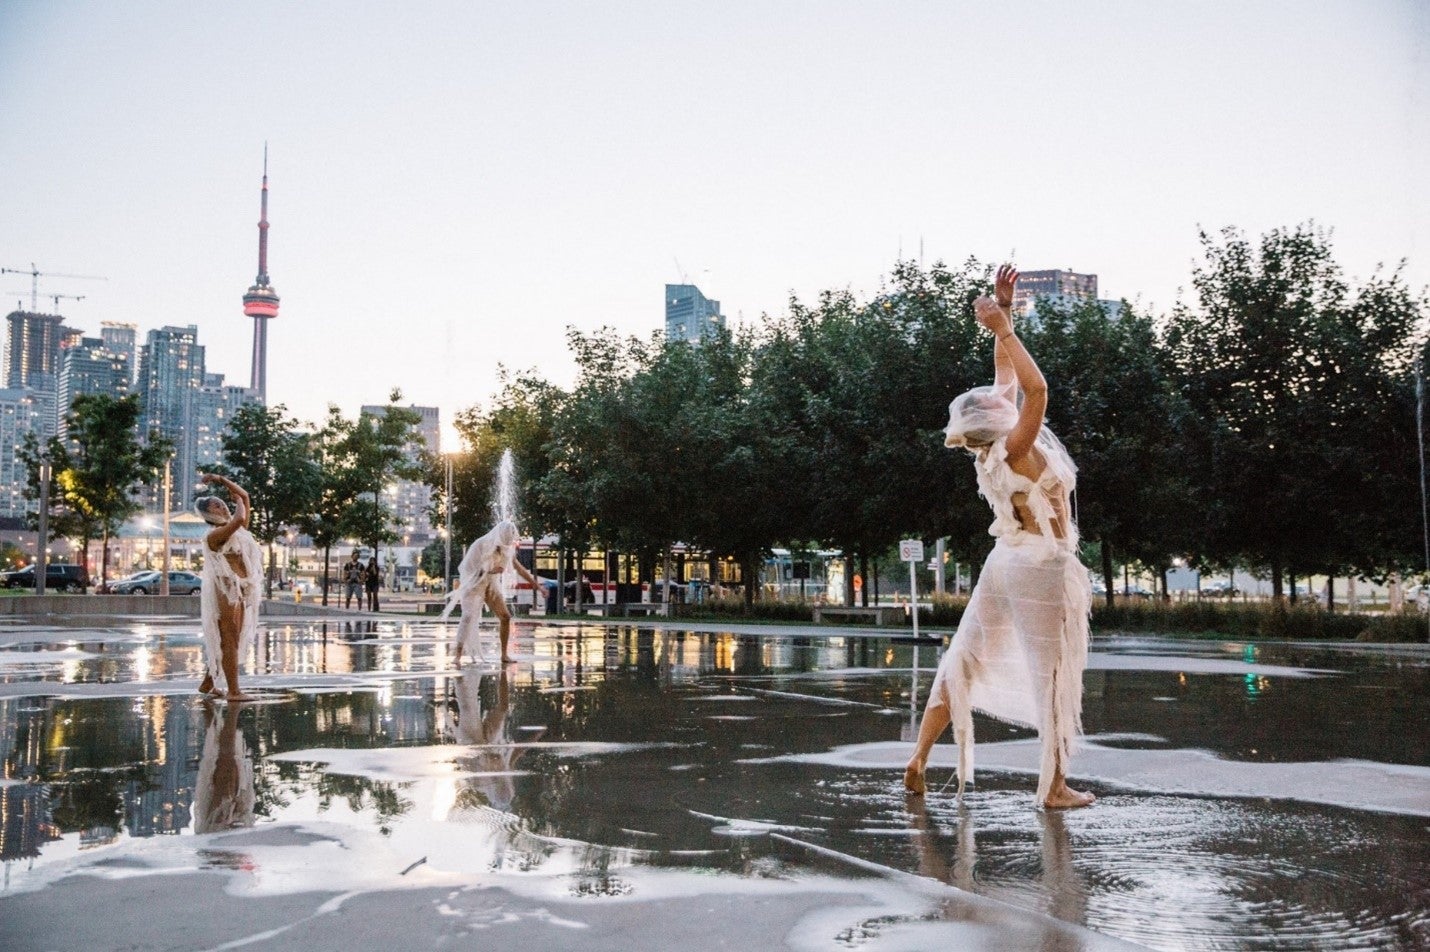 dancers performing in the splash pad area of an urban park